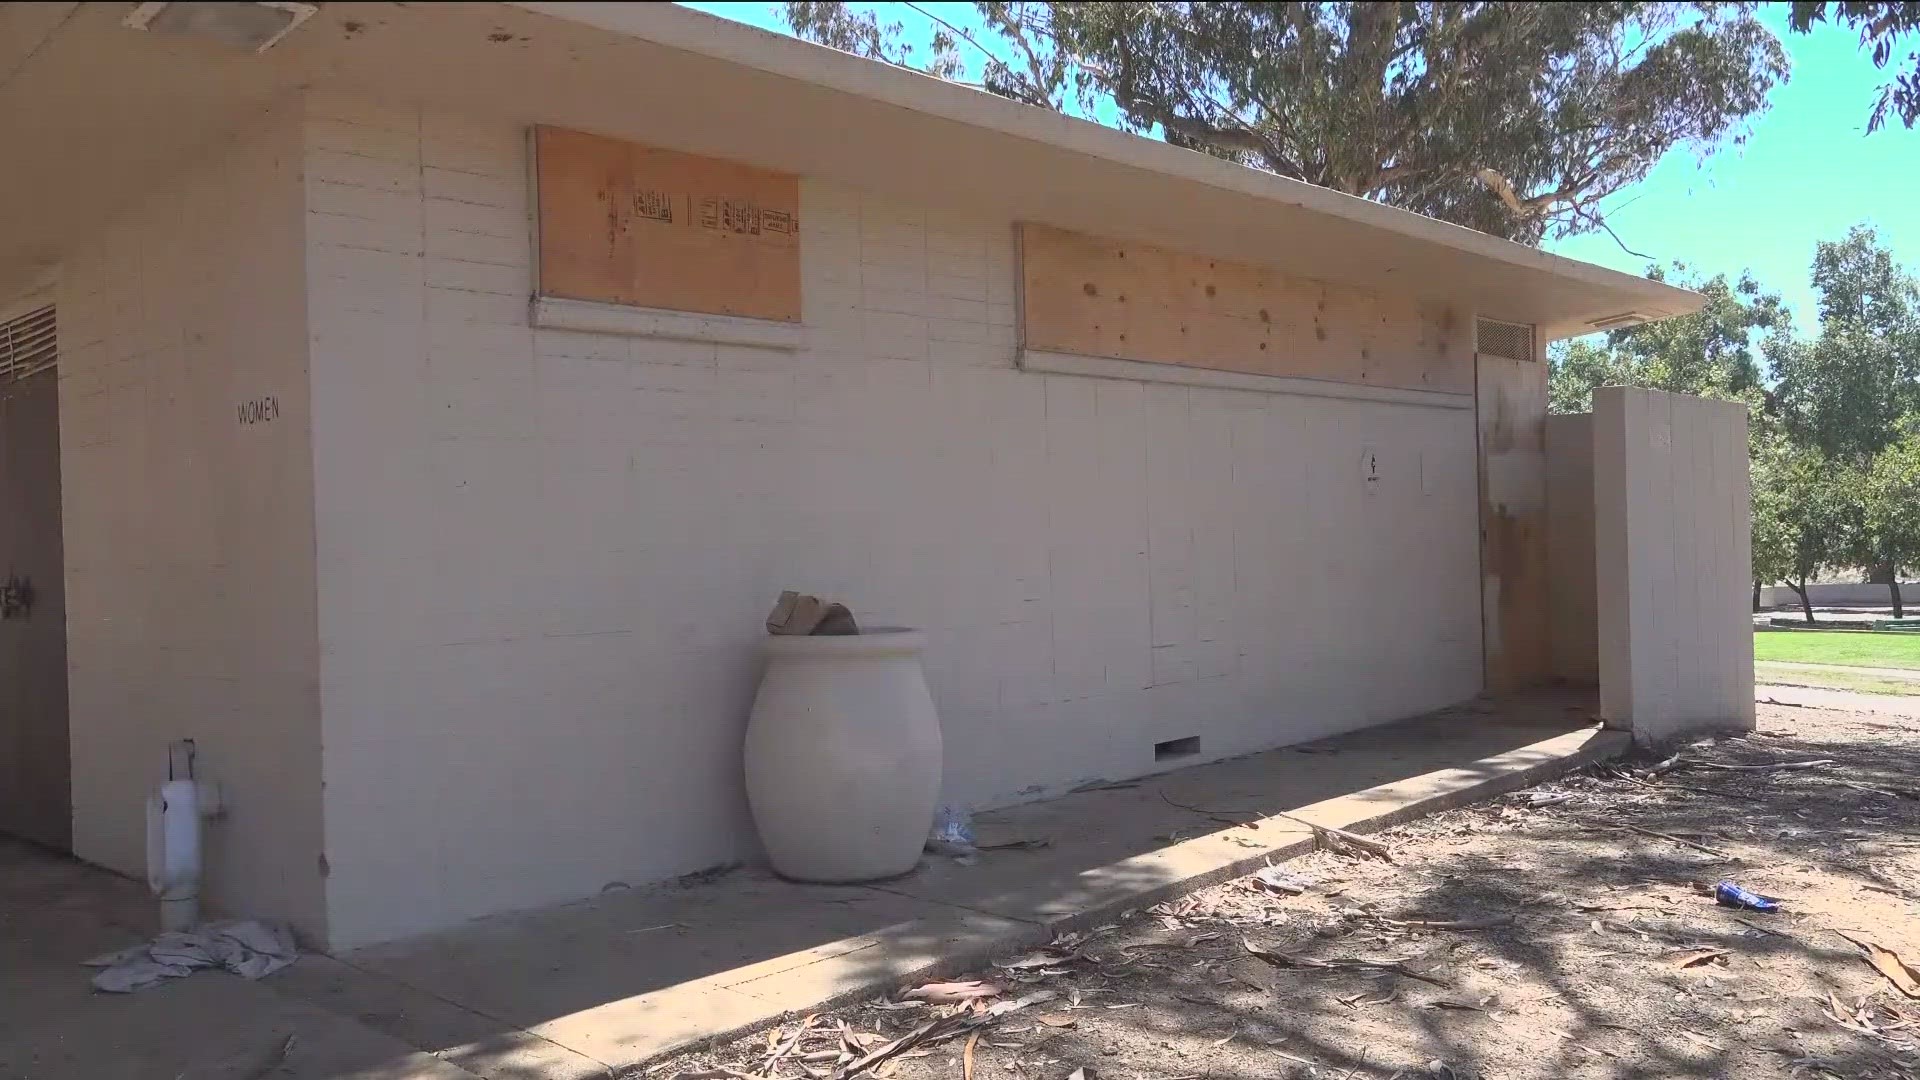 CBS 8 checked out the area along Jacaranda Drive near the Morley Field bocce ball courts.  Sure enough, the restrooms were boarded up.